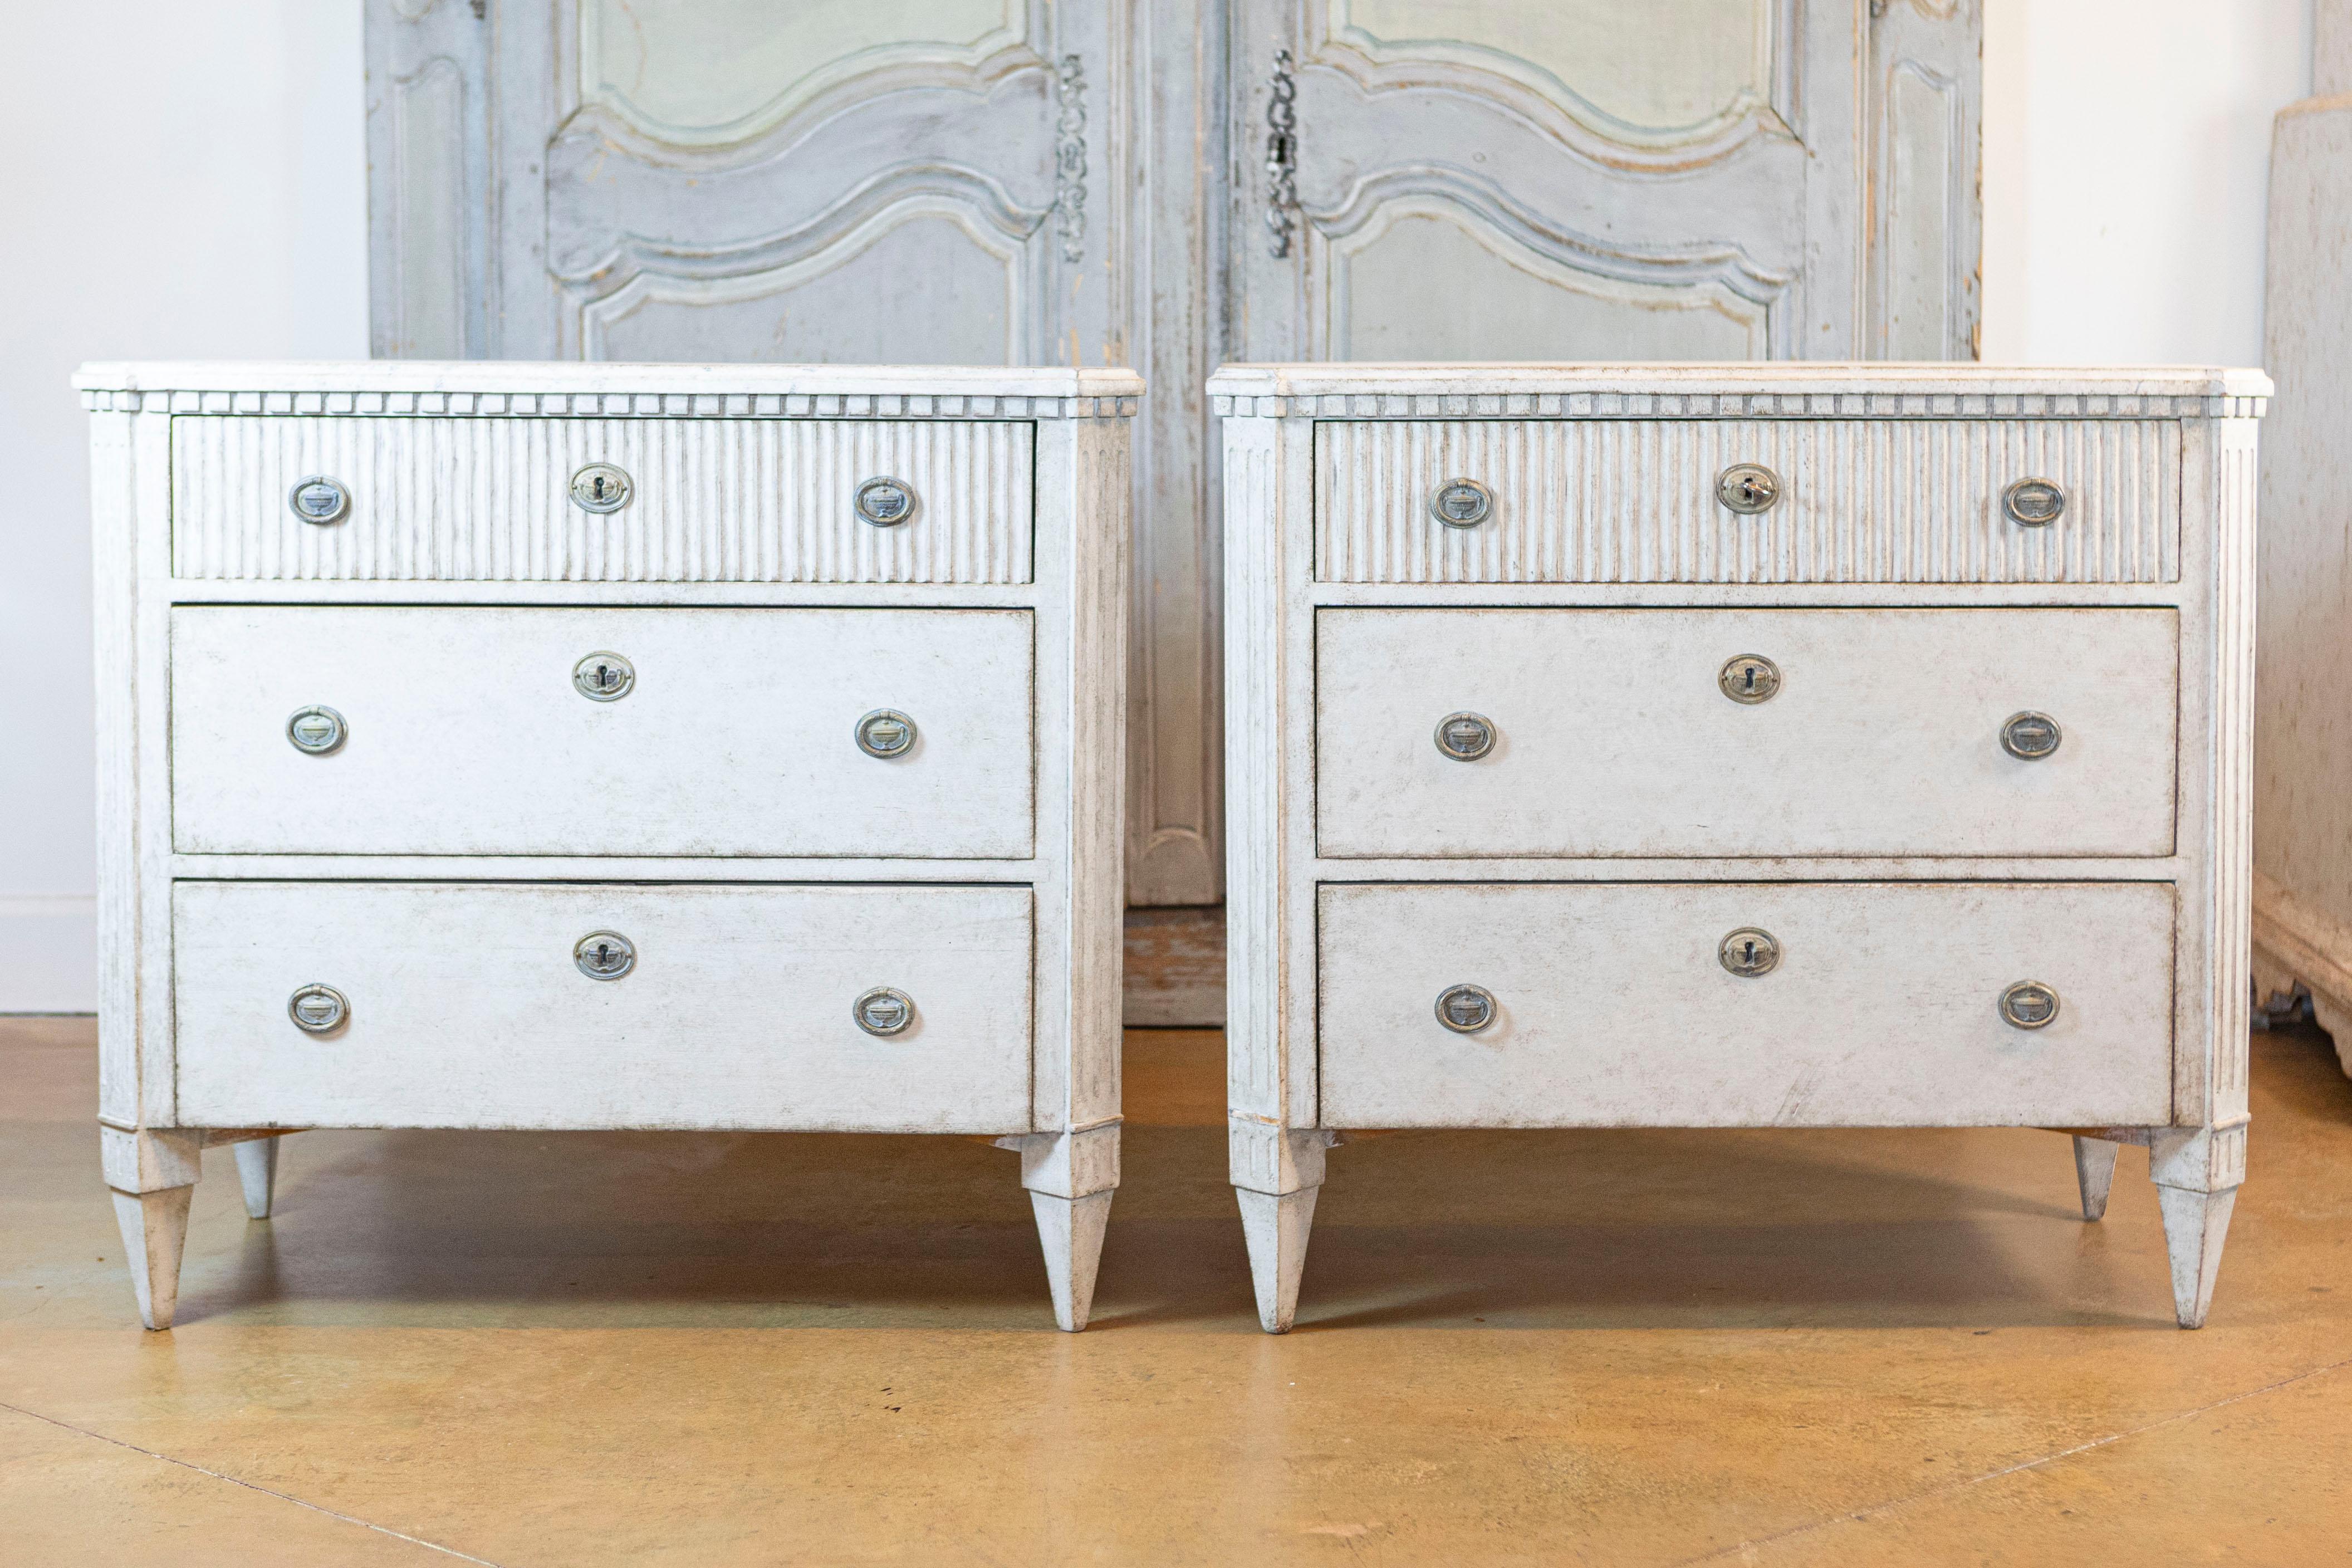 A pair of Swedish Gustavian style three-drawer chests from circa 1870 with lightly marbleized tops, gray painted finish and carved reeded motifs. Elevate your interior with this stunning pair of Swedish Gustavian-style three-drawer chests from